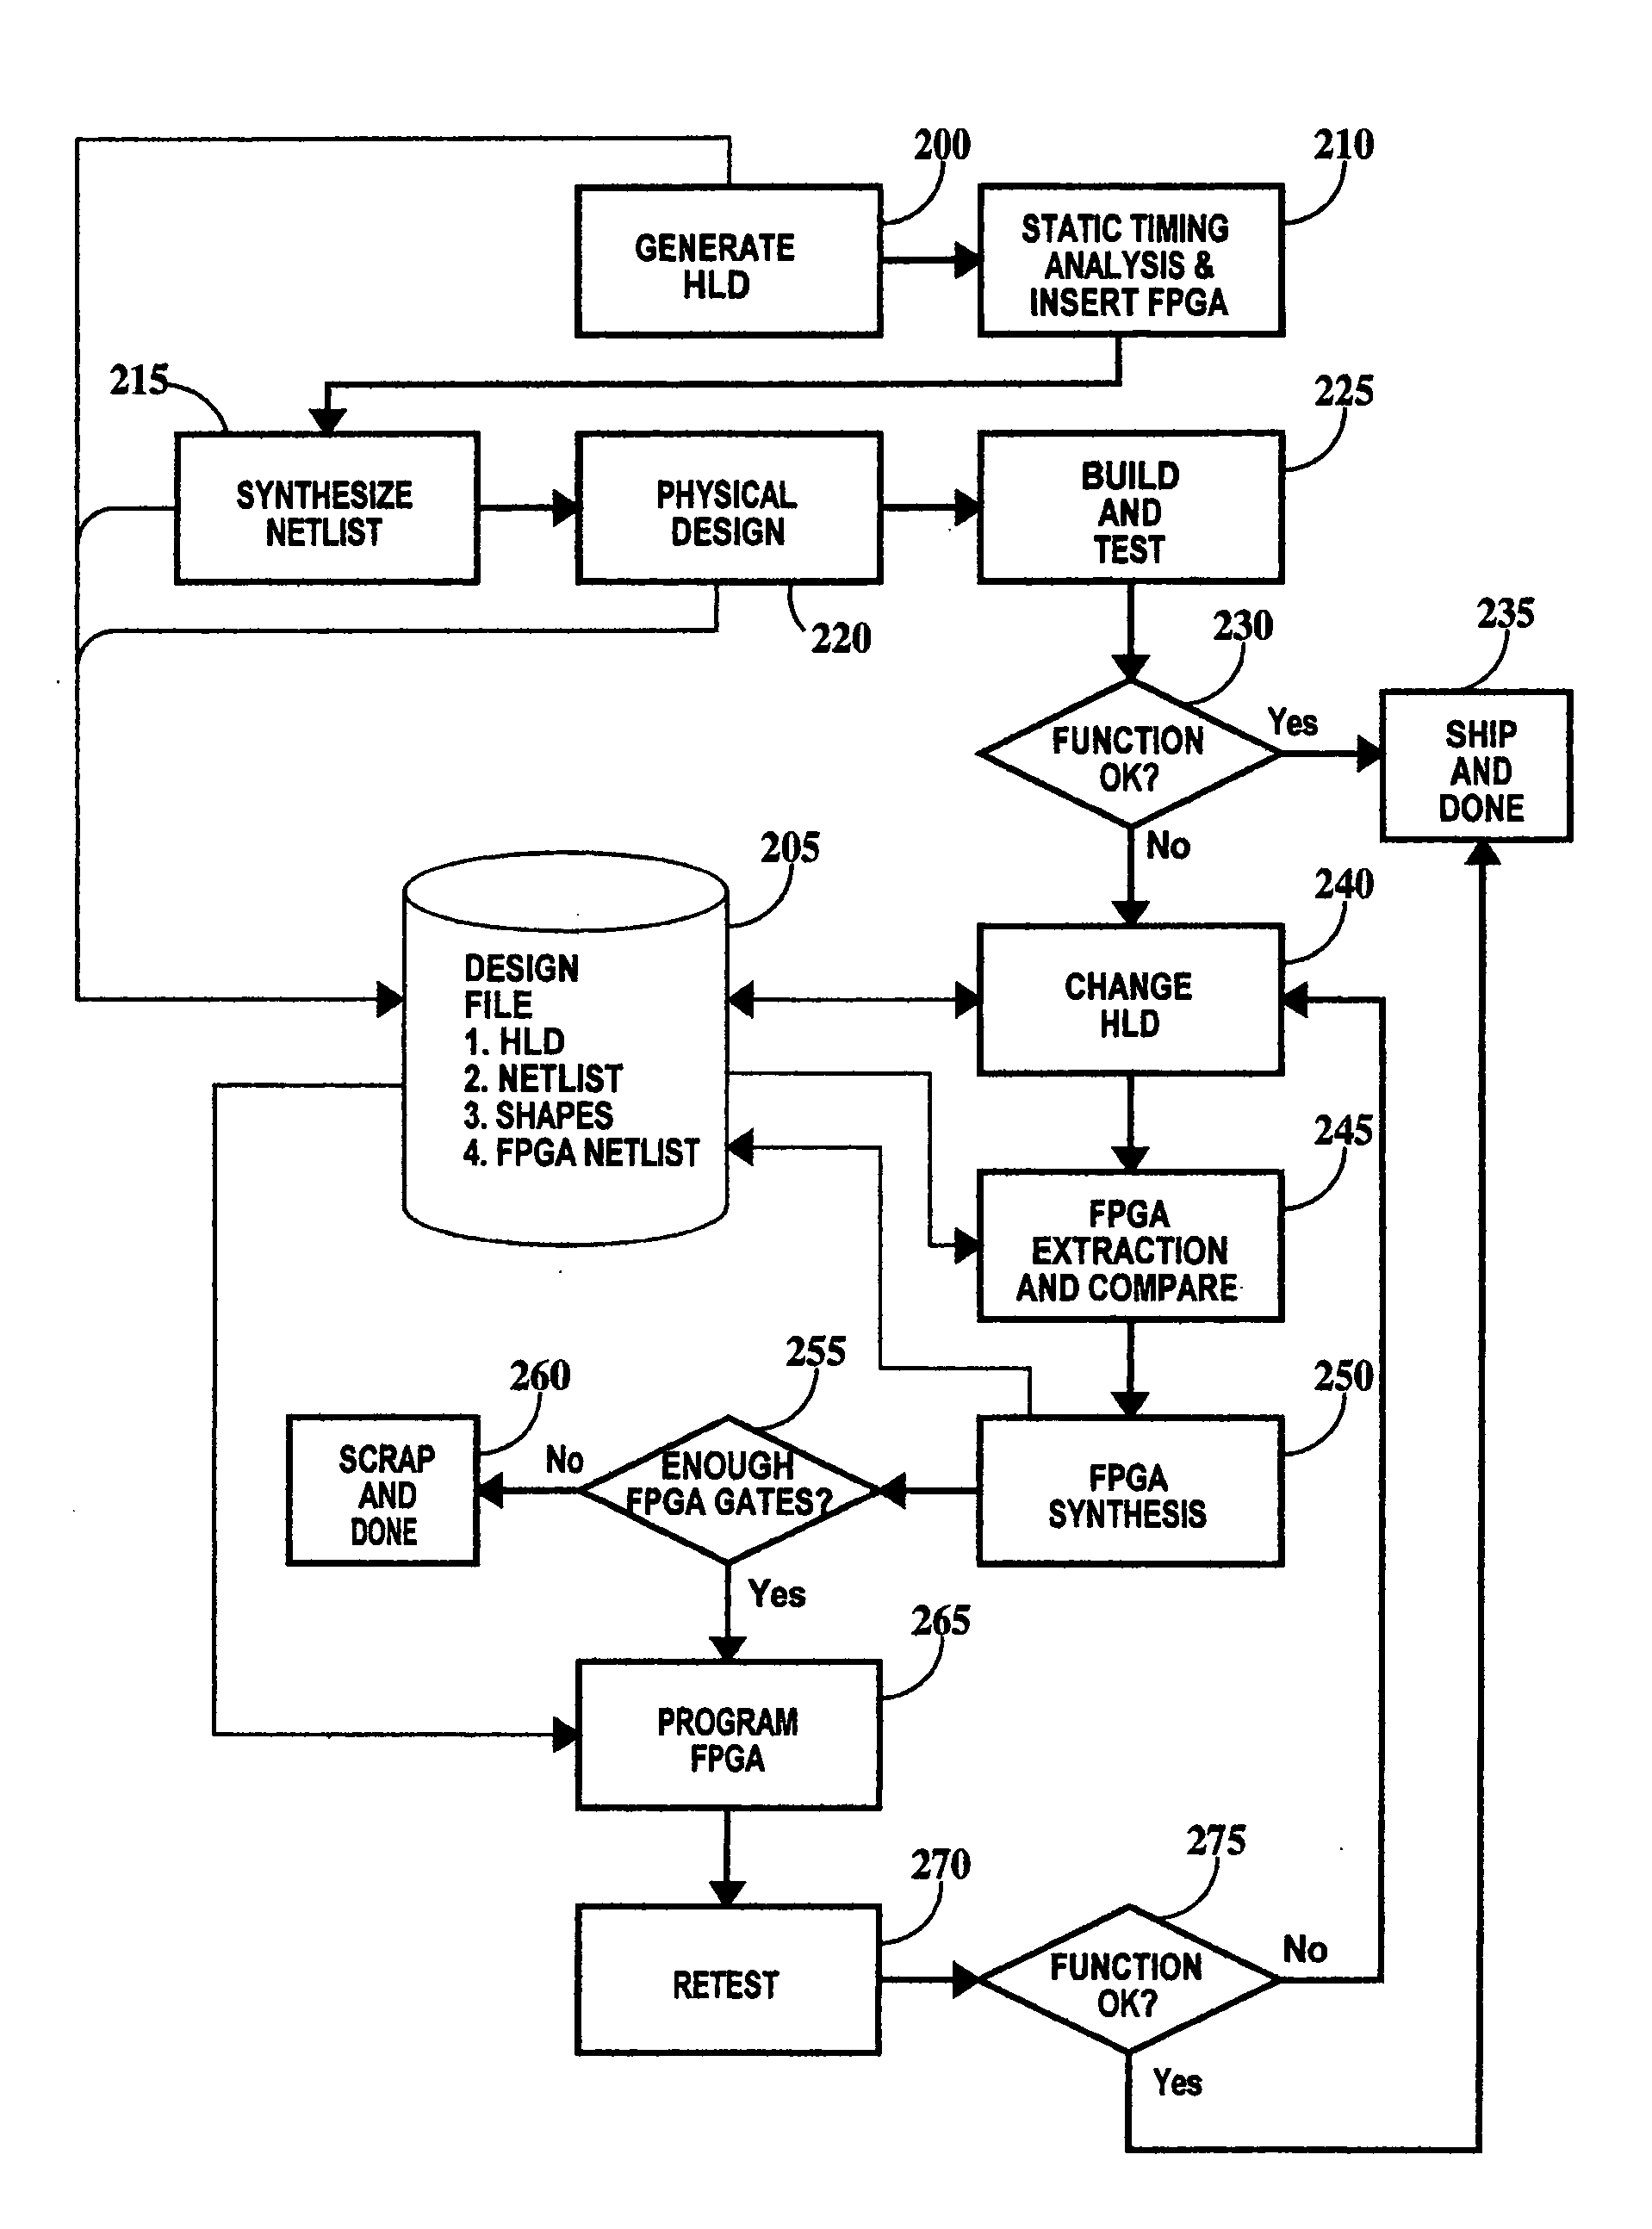 Method for modifying the behavior of a state machine